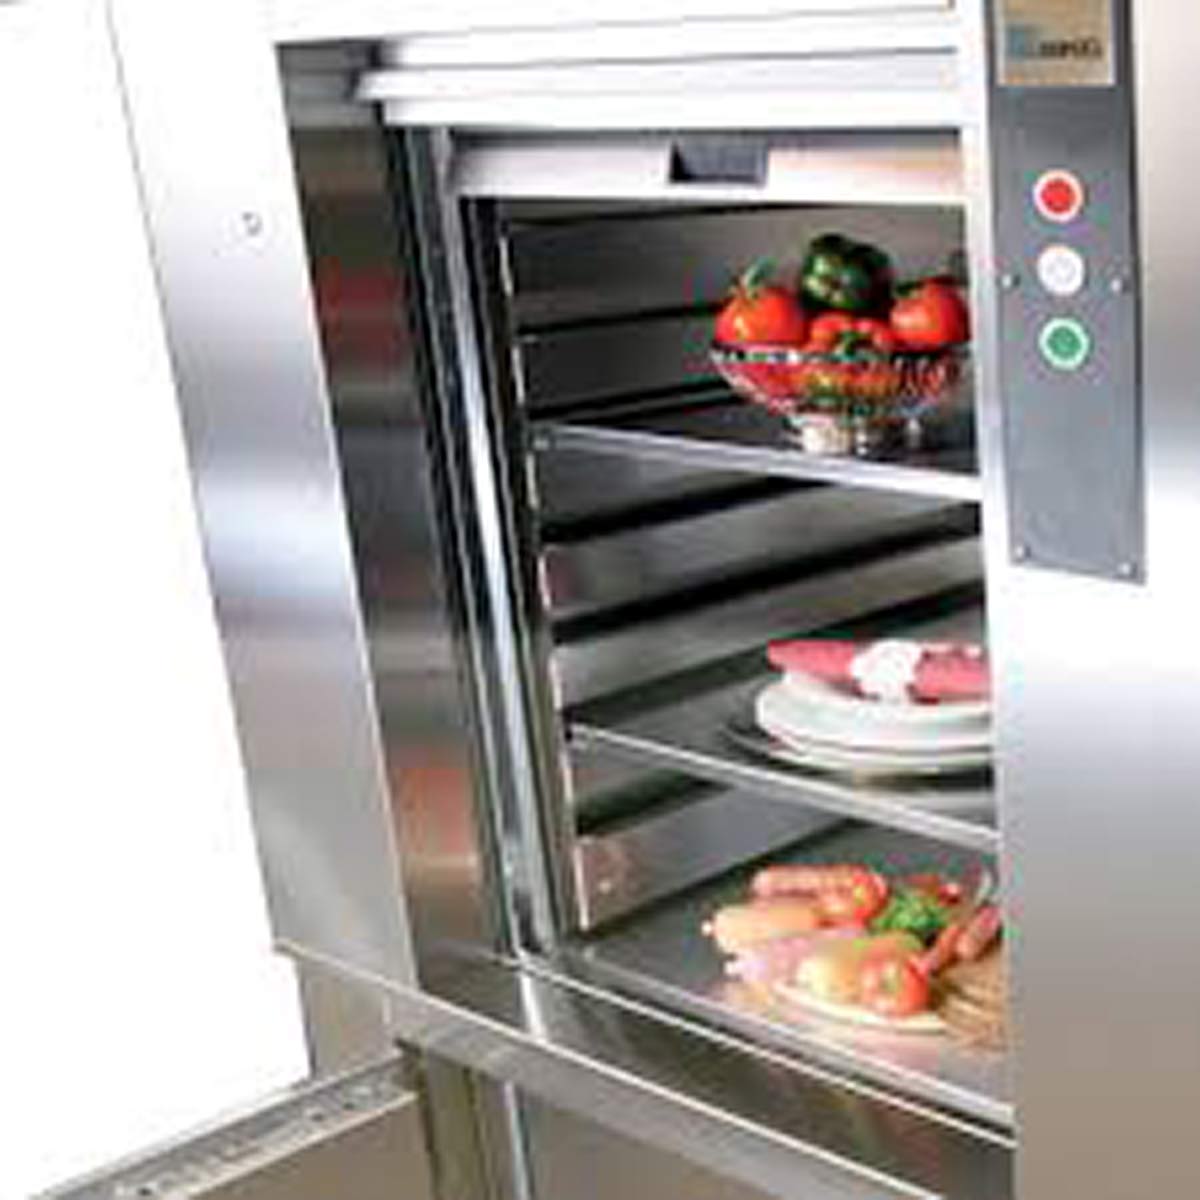 dumbwaiter loaded with food